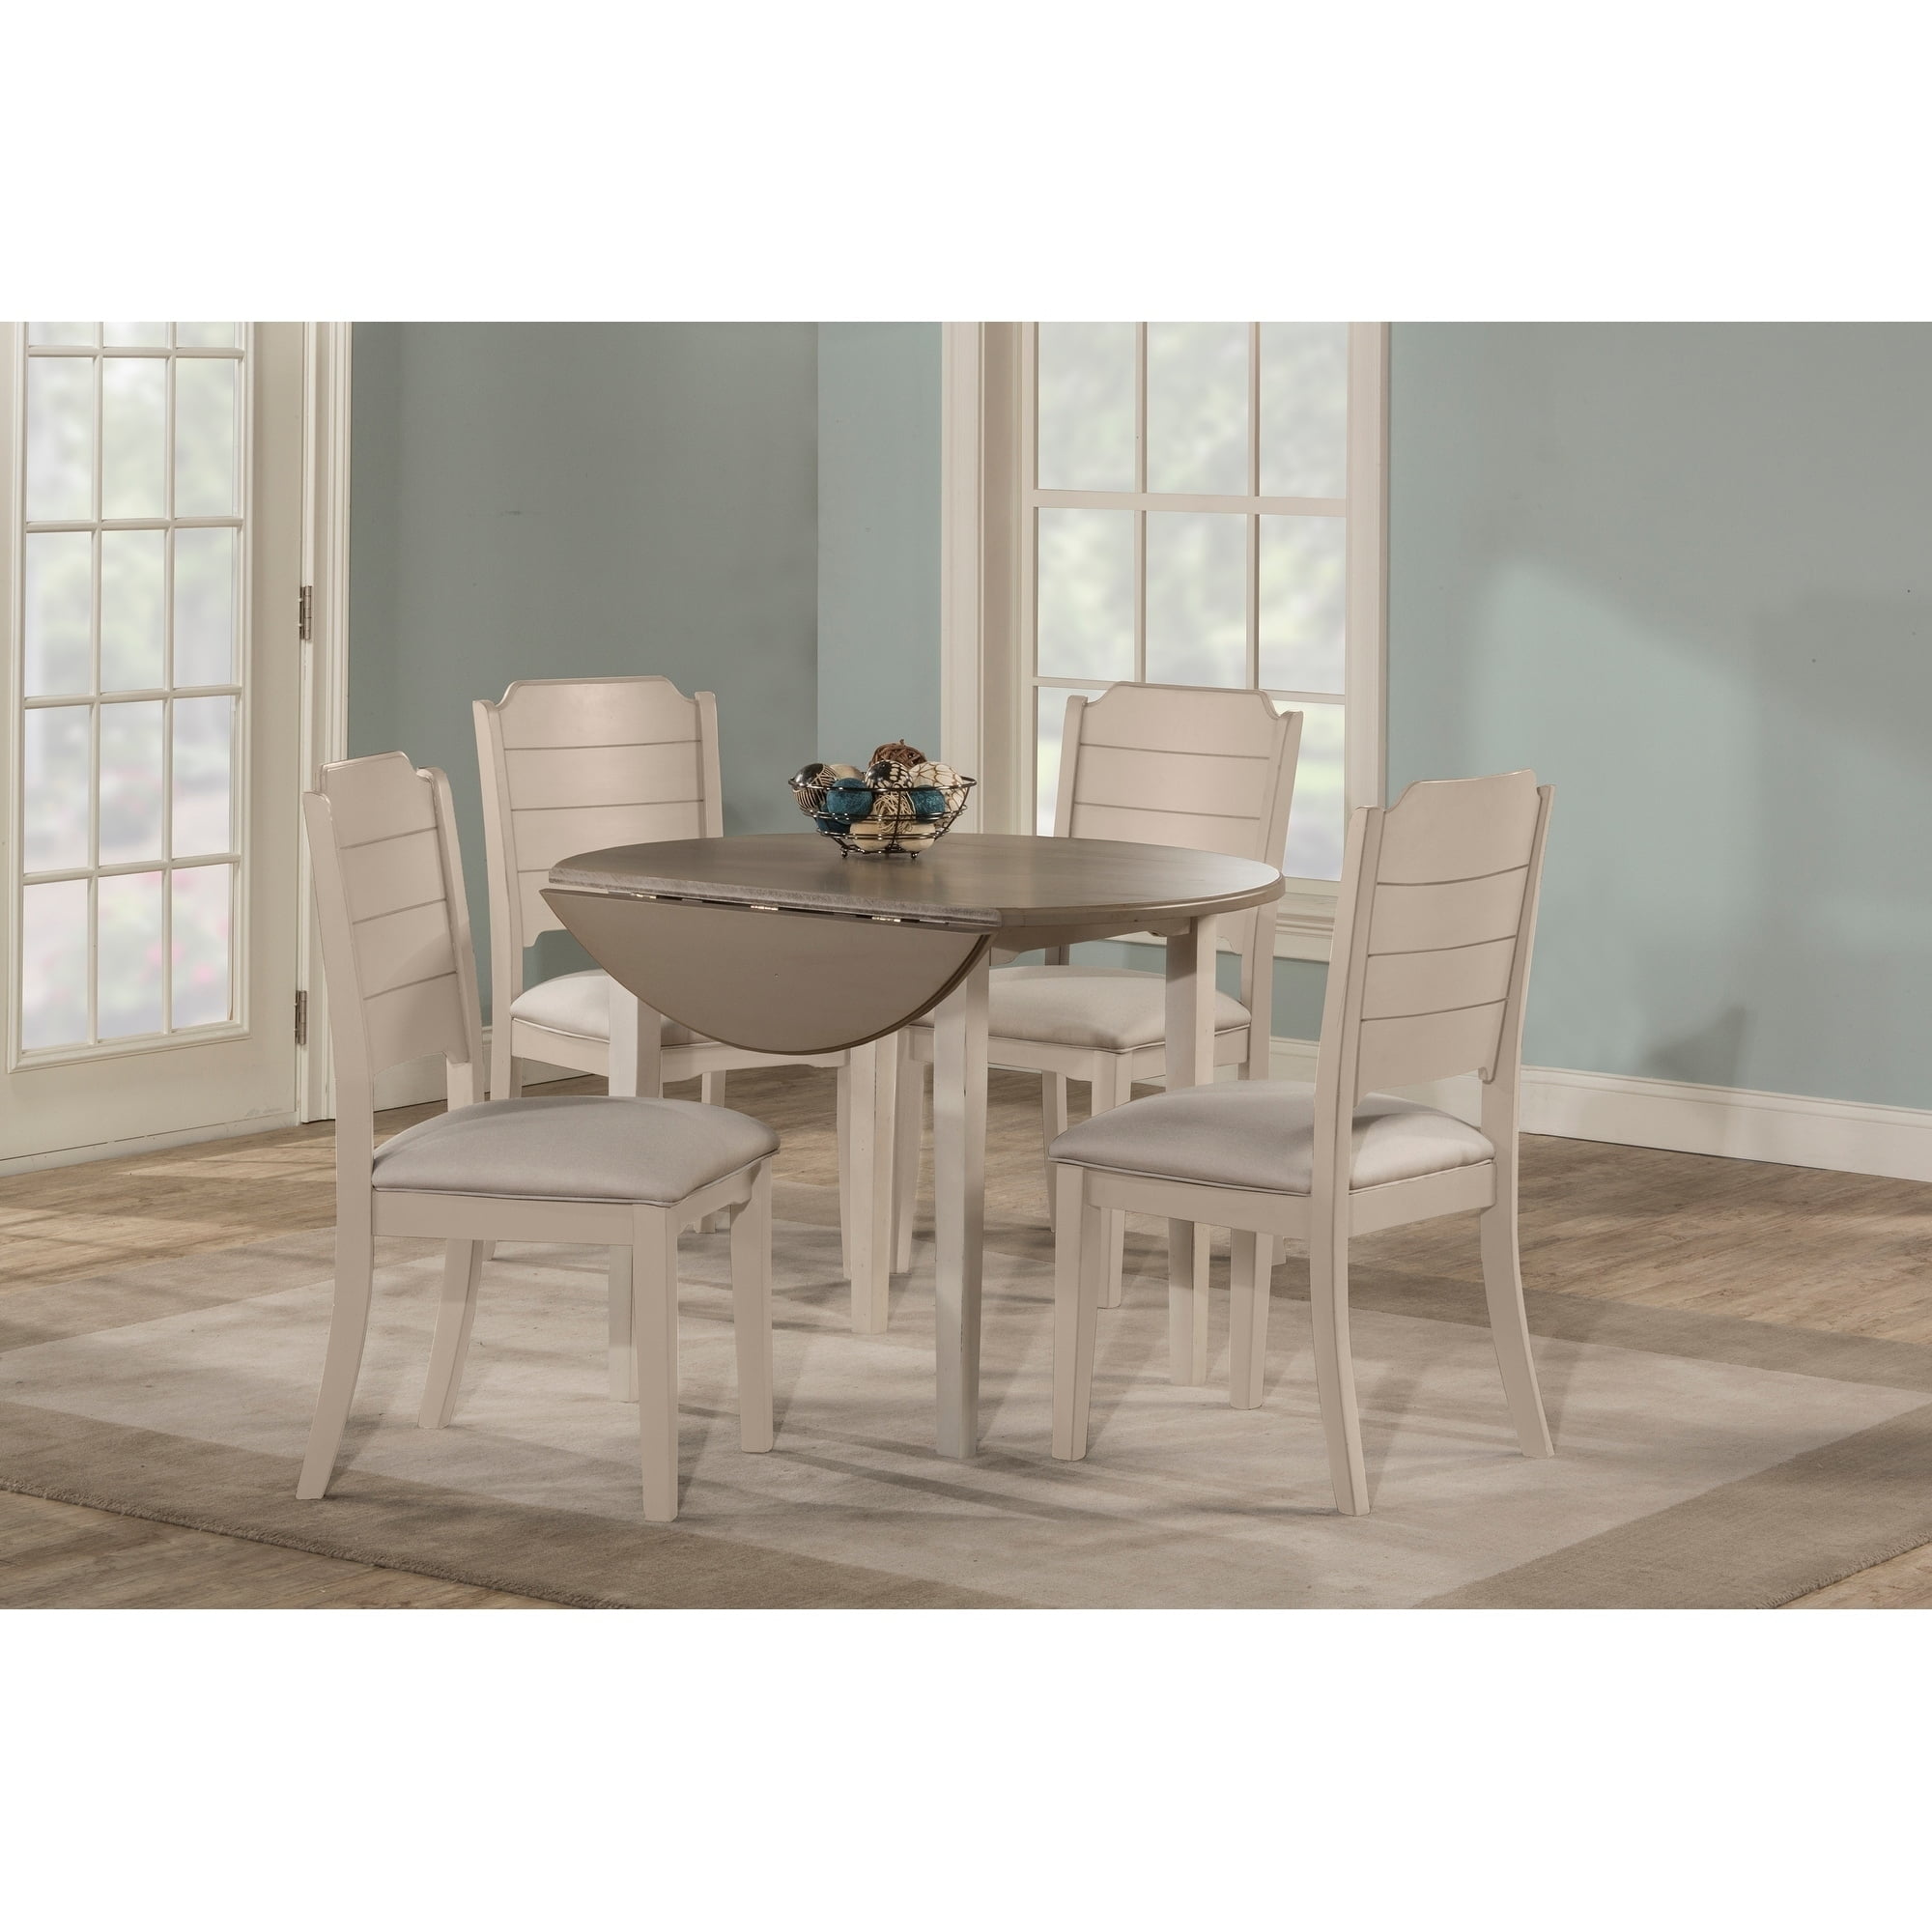 Hillsdale Furniture Clarion Five 5 Piece Round Drop Leaf Dining Set With Side Chairs Sea White Walmart Com Walmart Com